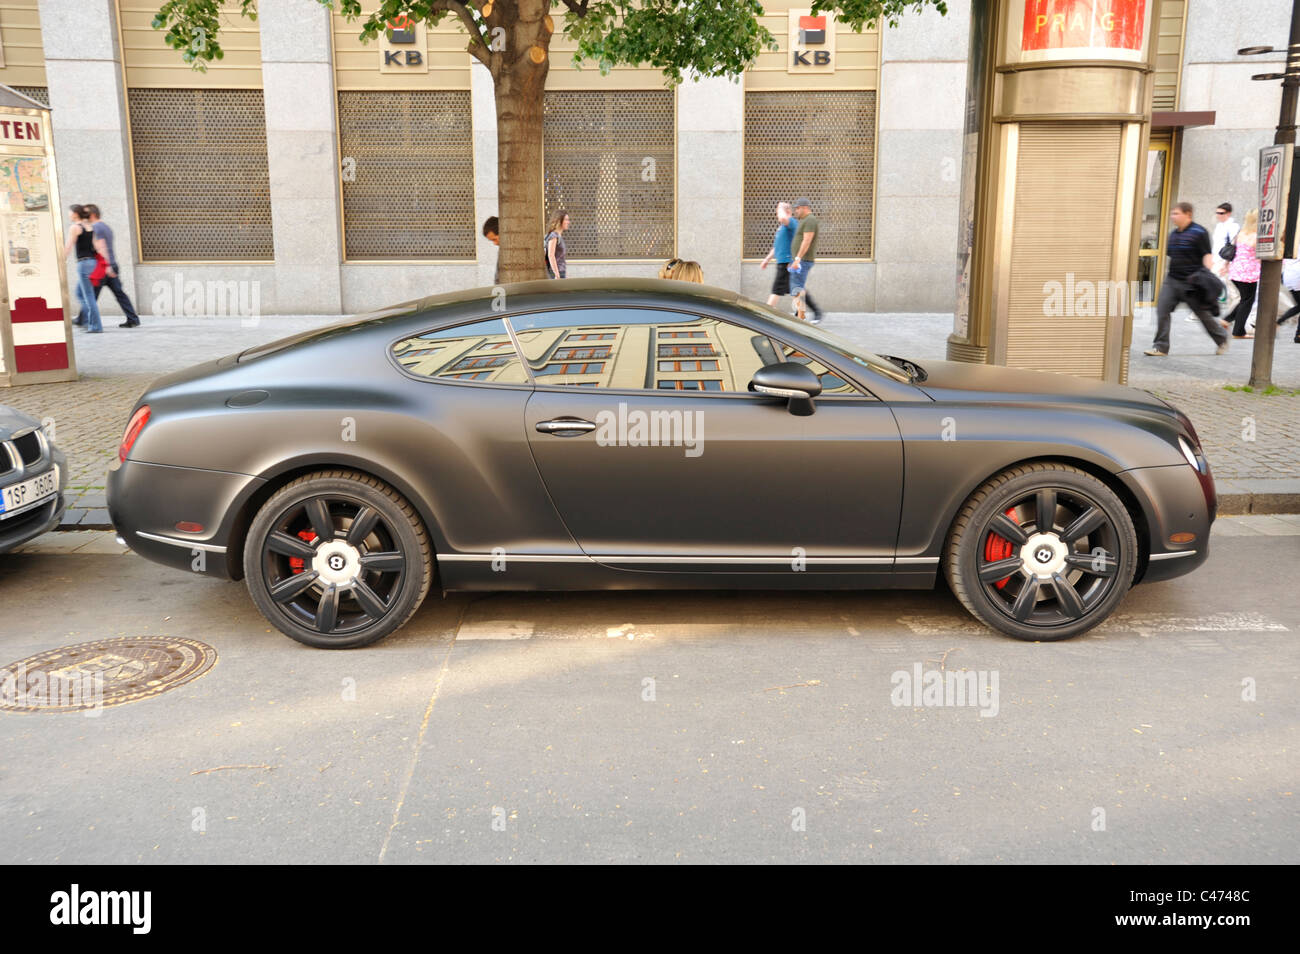 Bentley Continental spotted in Manchester, United Kingdom on 01/19